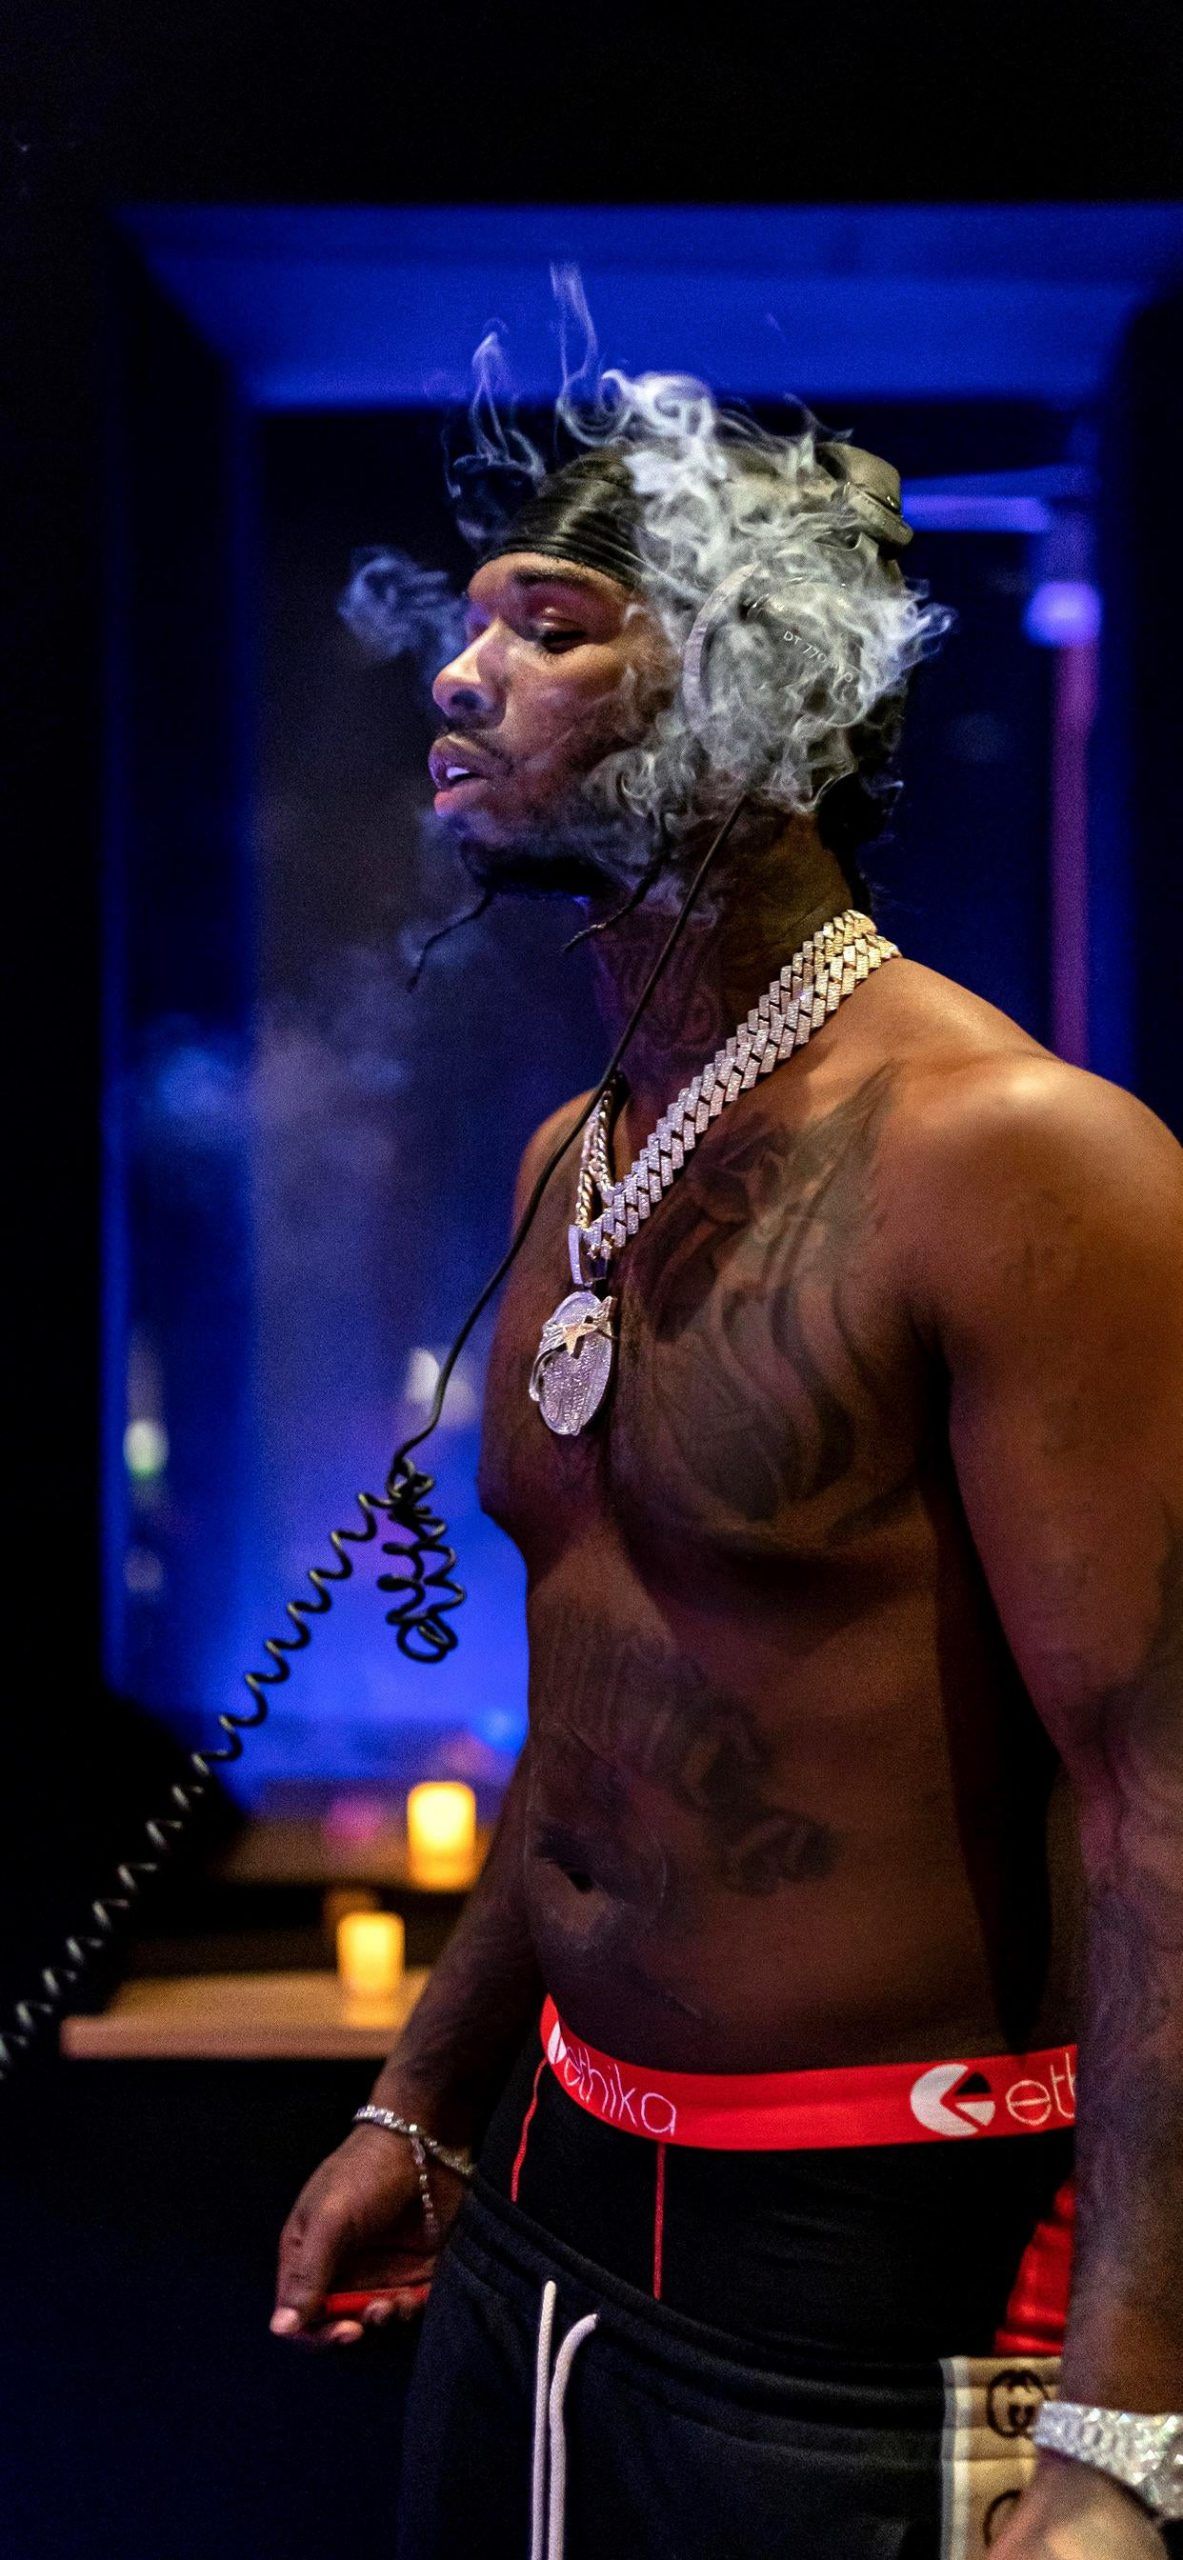 A man smoking on the phone in his underwear - Pop Smoke